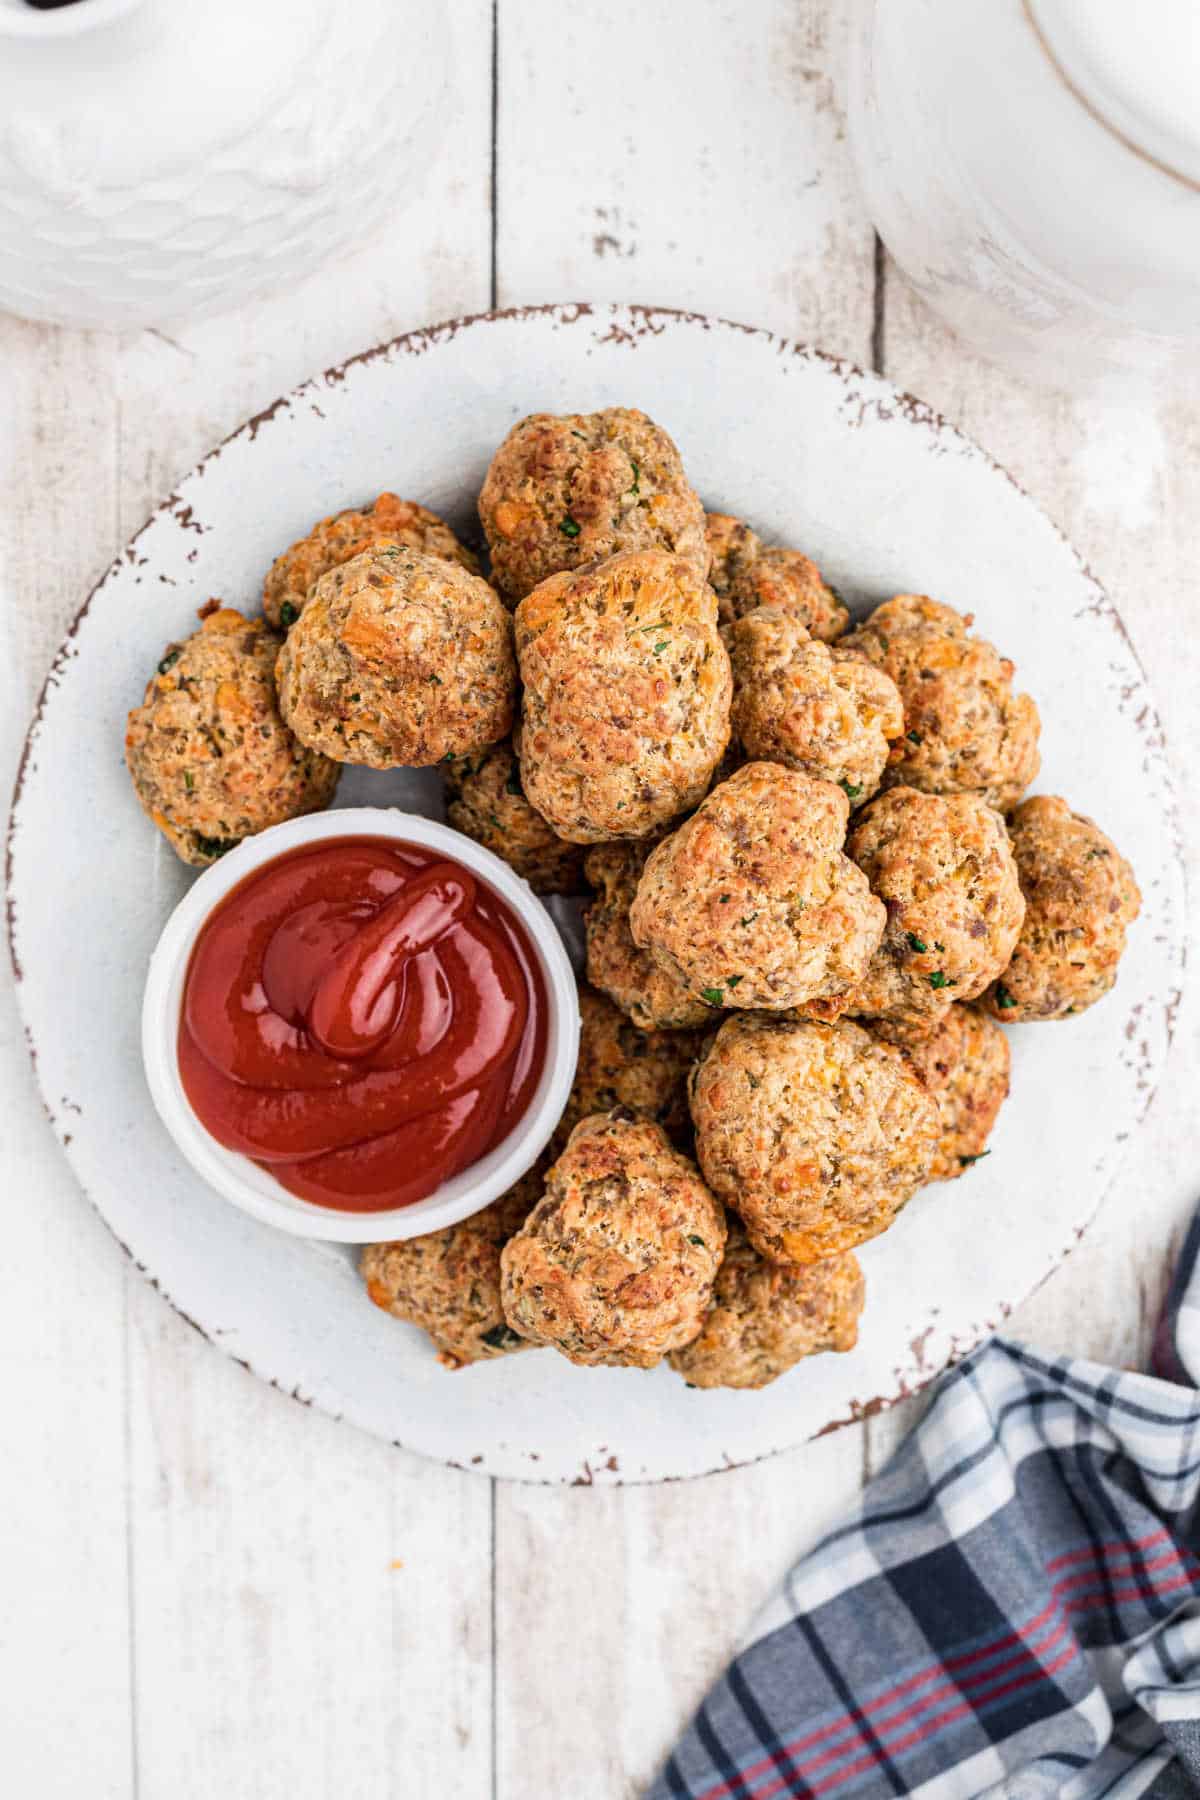 Overhead shot of a plate full of air fryer sausage balls and a small bowl of ketchup.